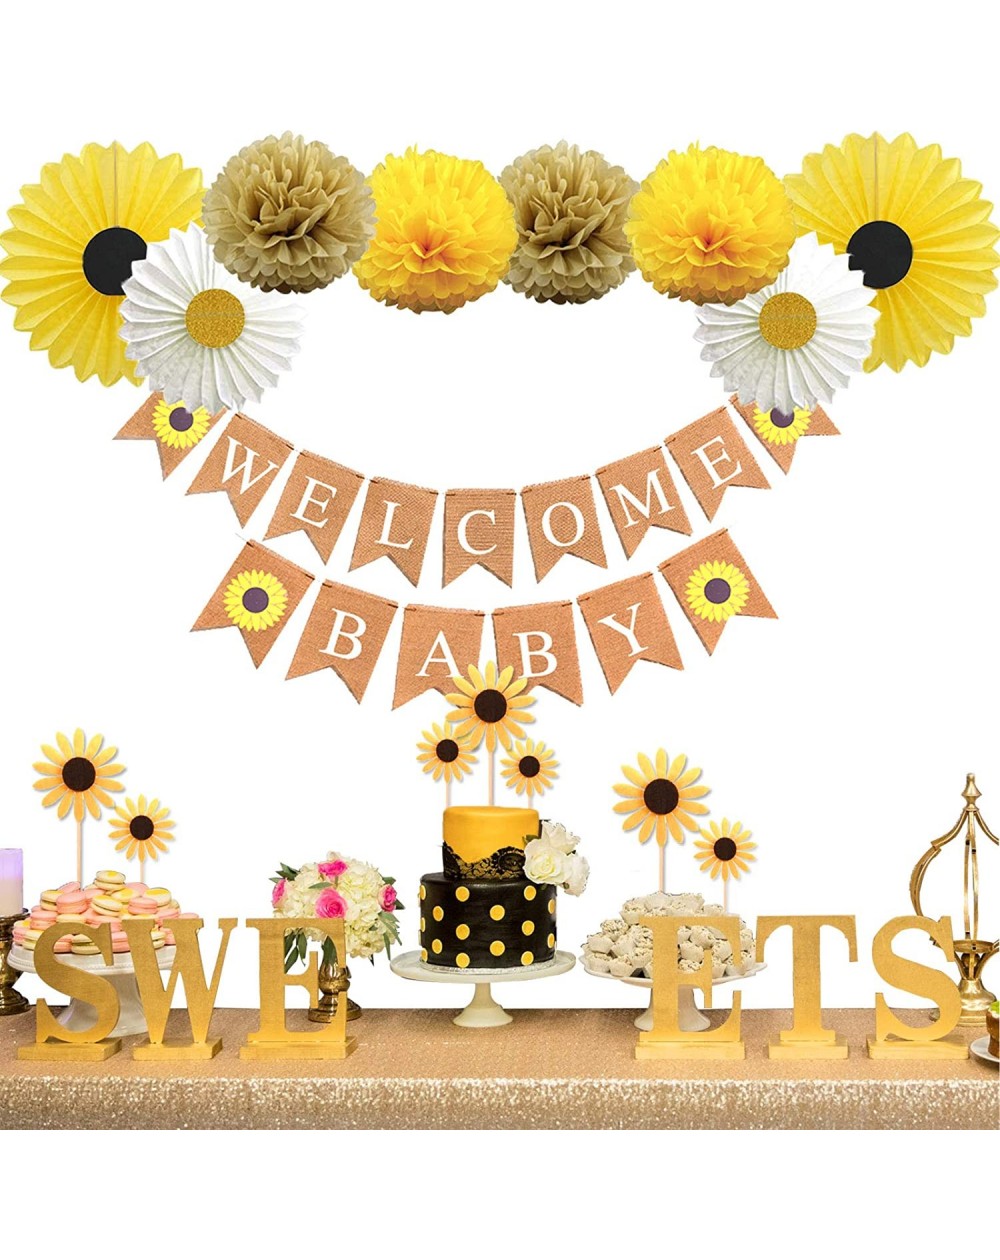 Banners Sunflower Baby Shower Party Decorations Supplies Kit- Sunflower Welcome Baby Banner- Yellow Sunflowers Cupcake Topper...